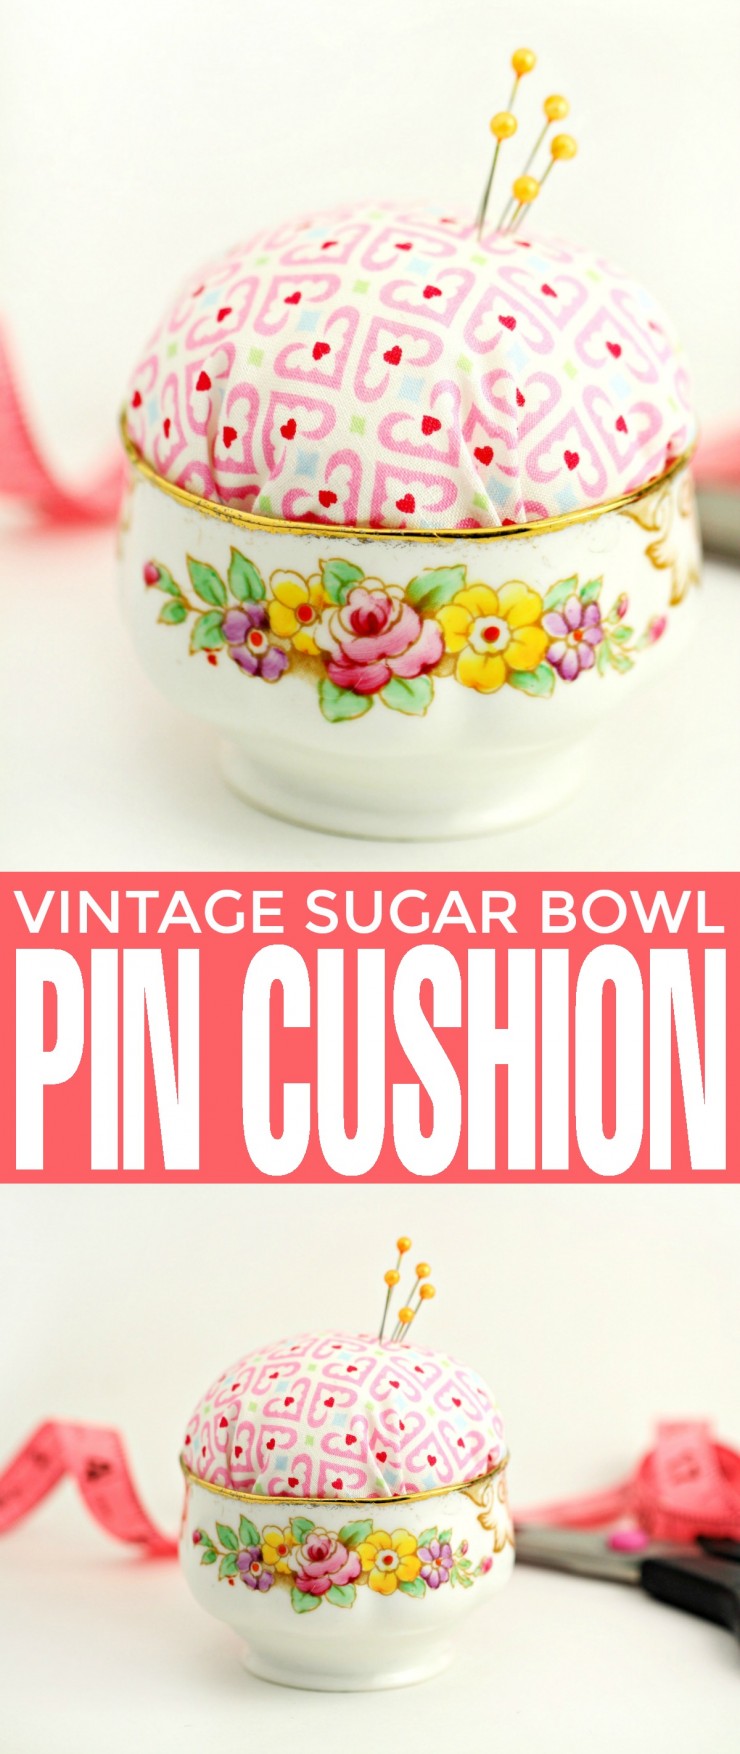 This Vintage Sugar Bowl Pin Cushion is a really cute but practical and cheap DIY project that would make a great gift for anyone who loves to sew.